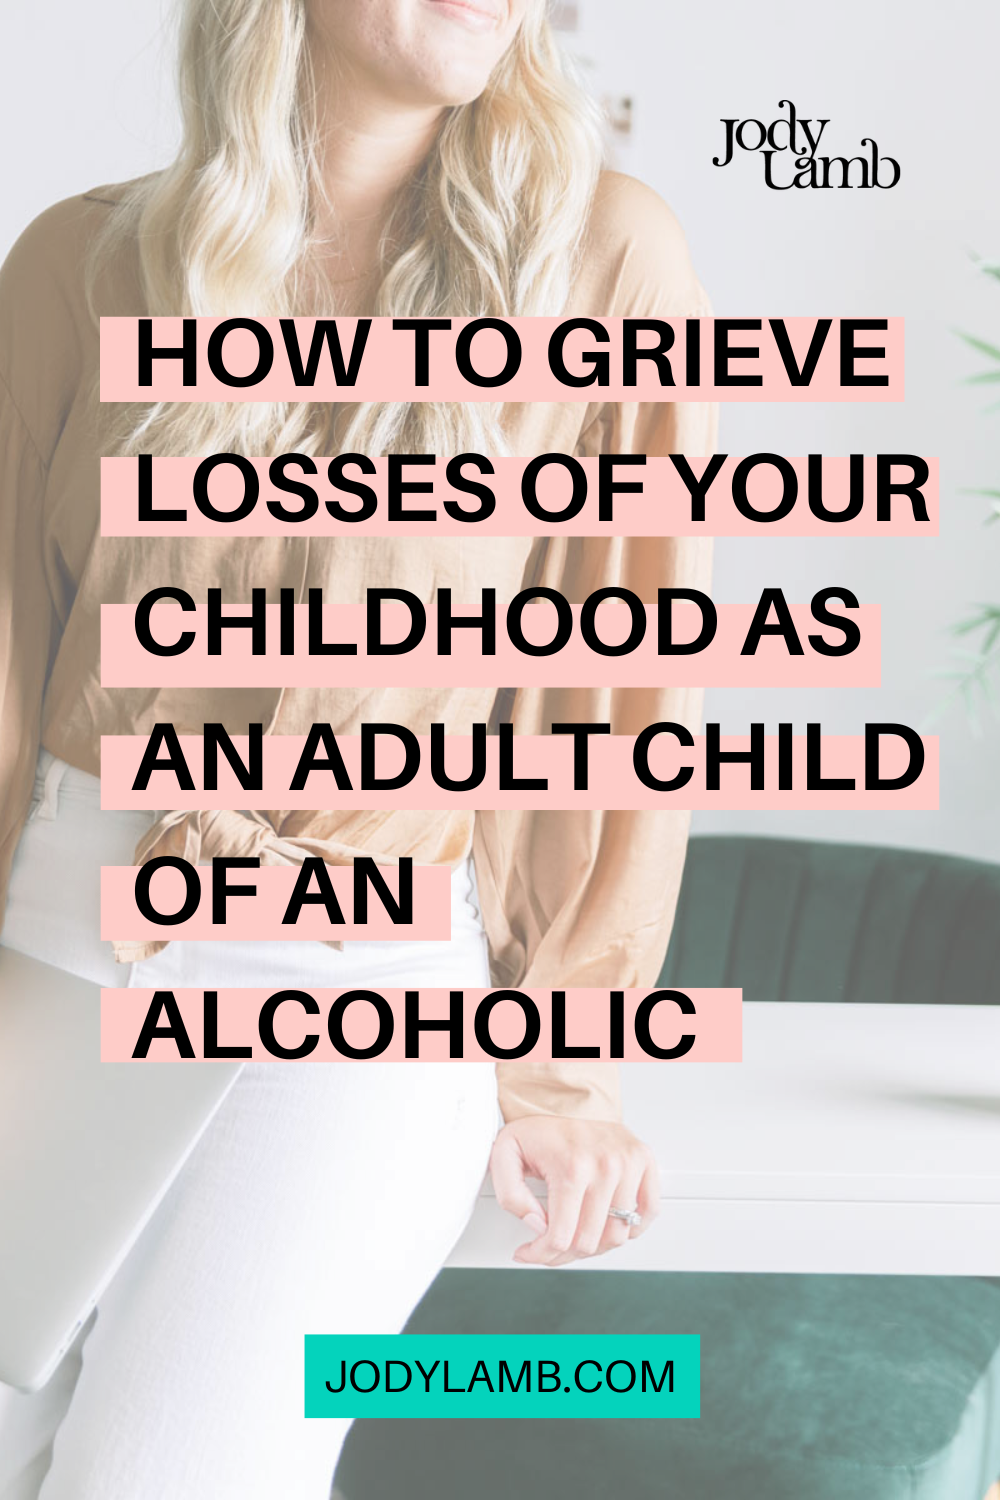 How to grieve the losses of your childhood as an adult child of an alcoholic